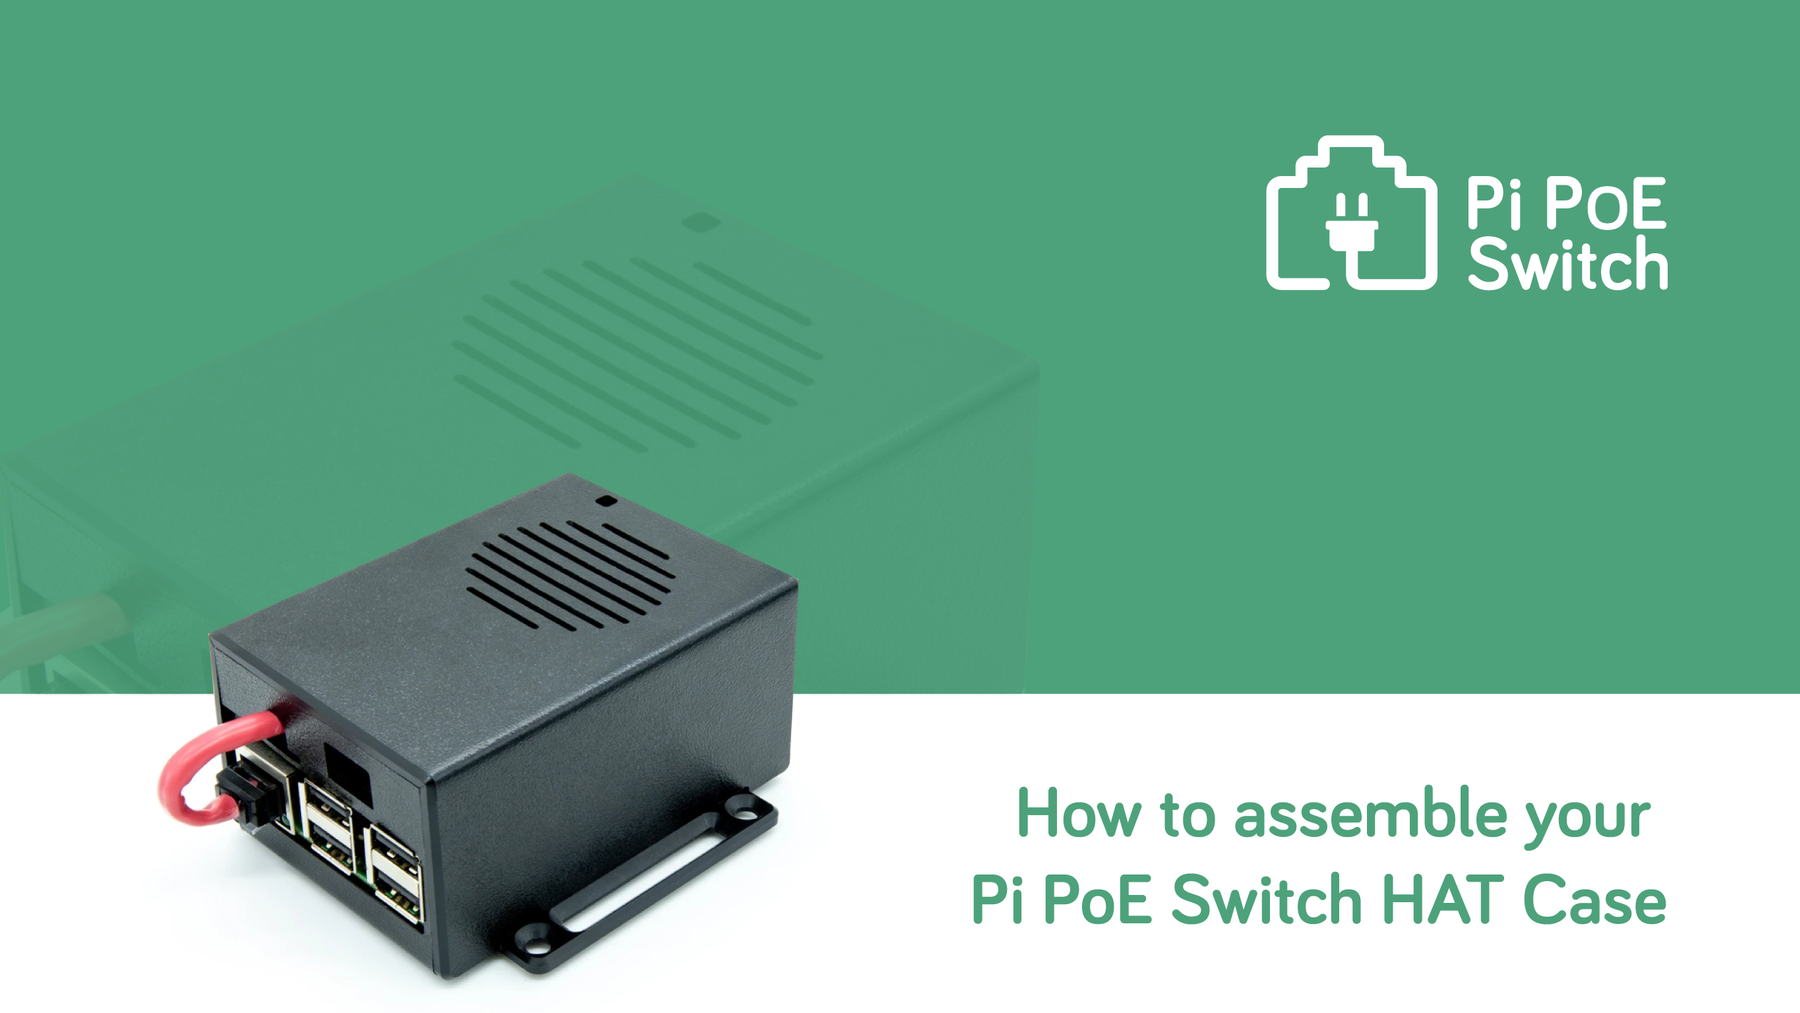 How to assemble your Pi PoE Switch HAT Case